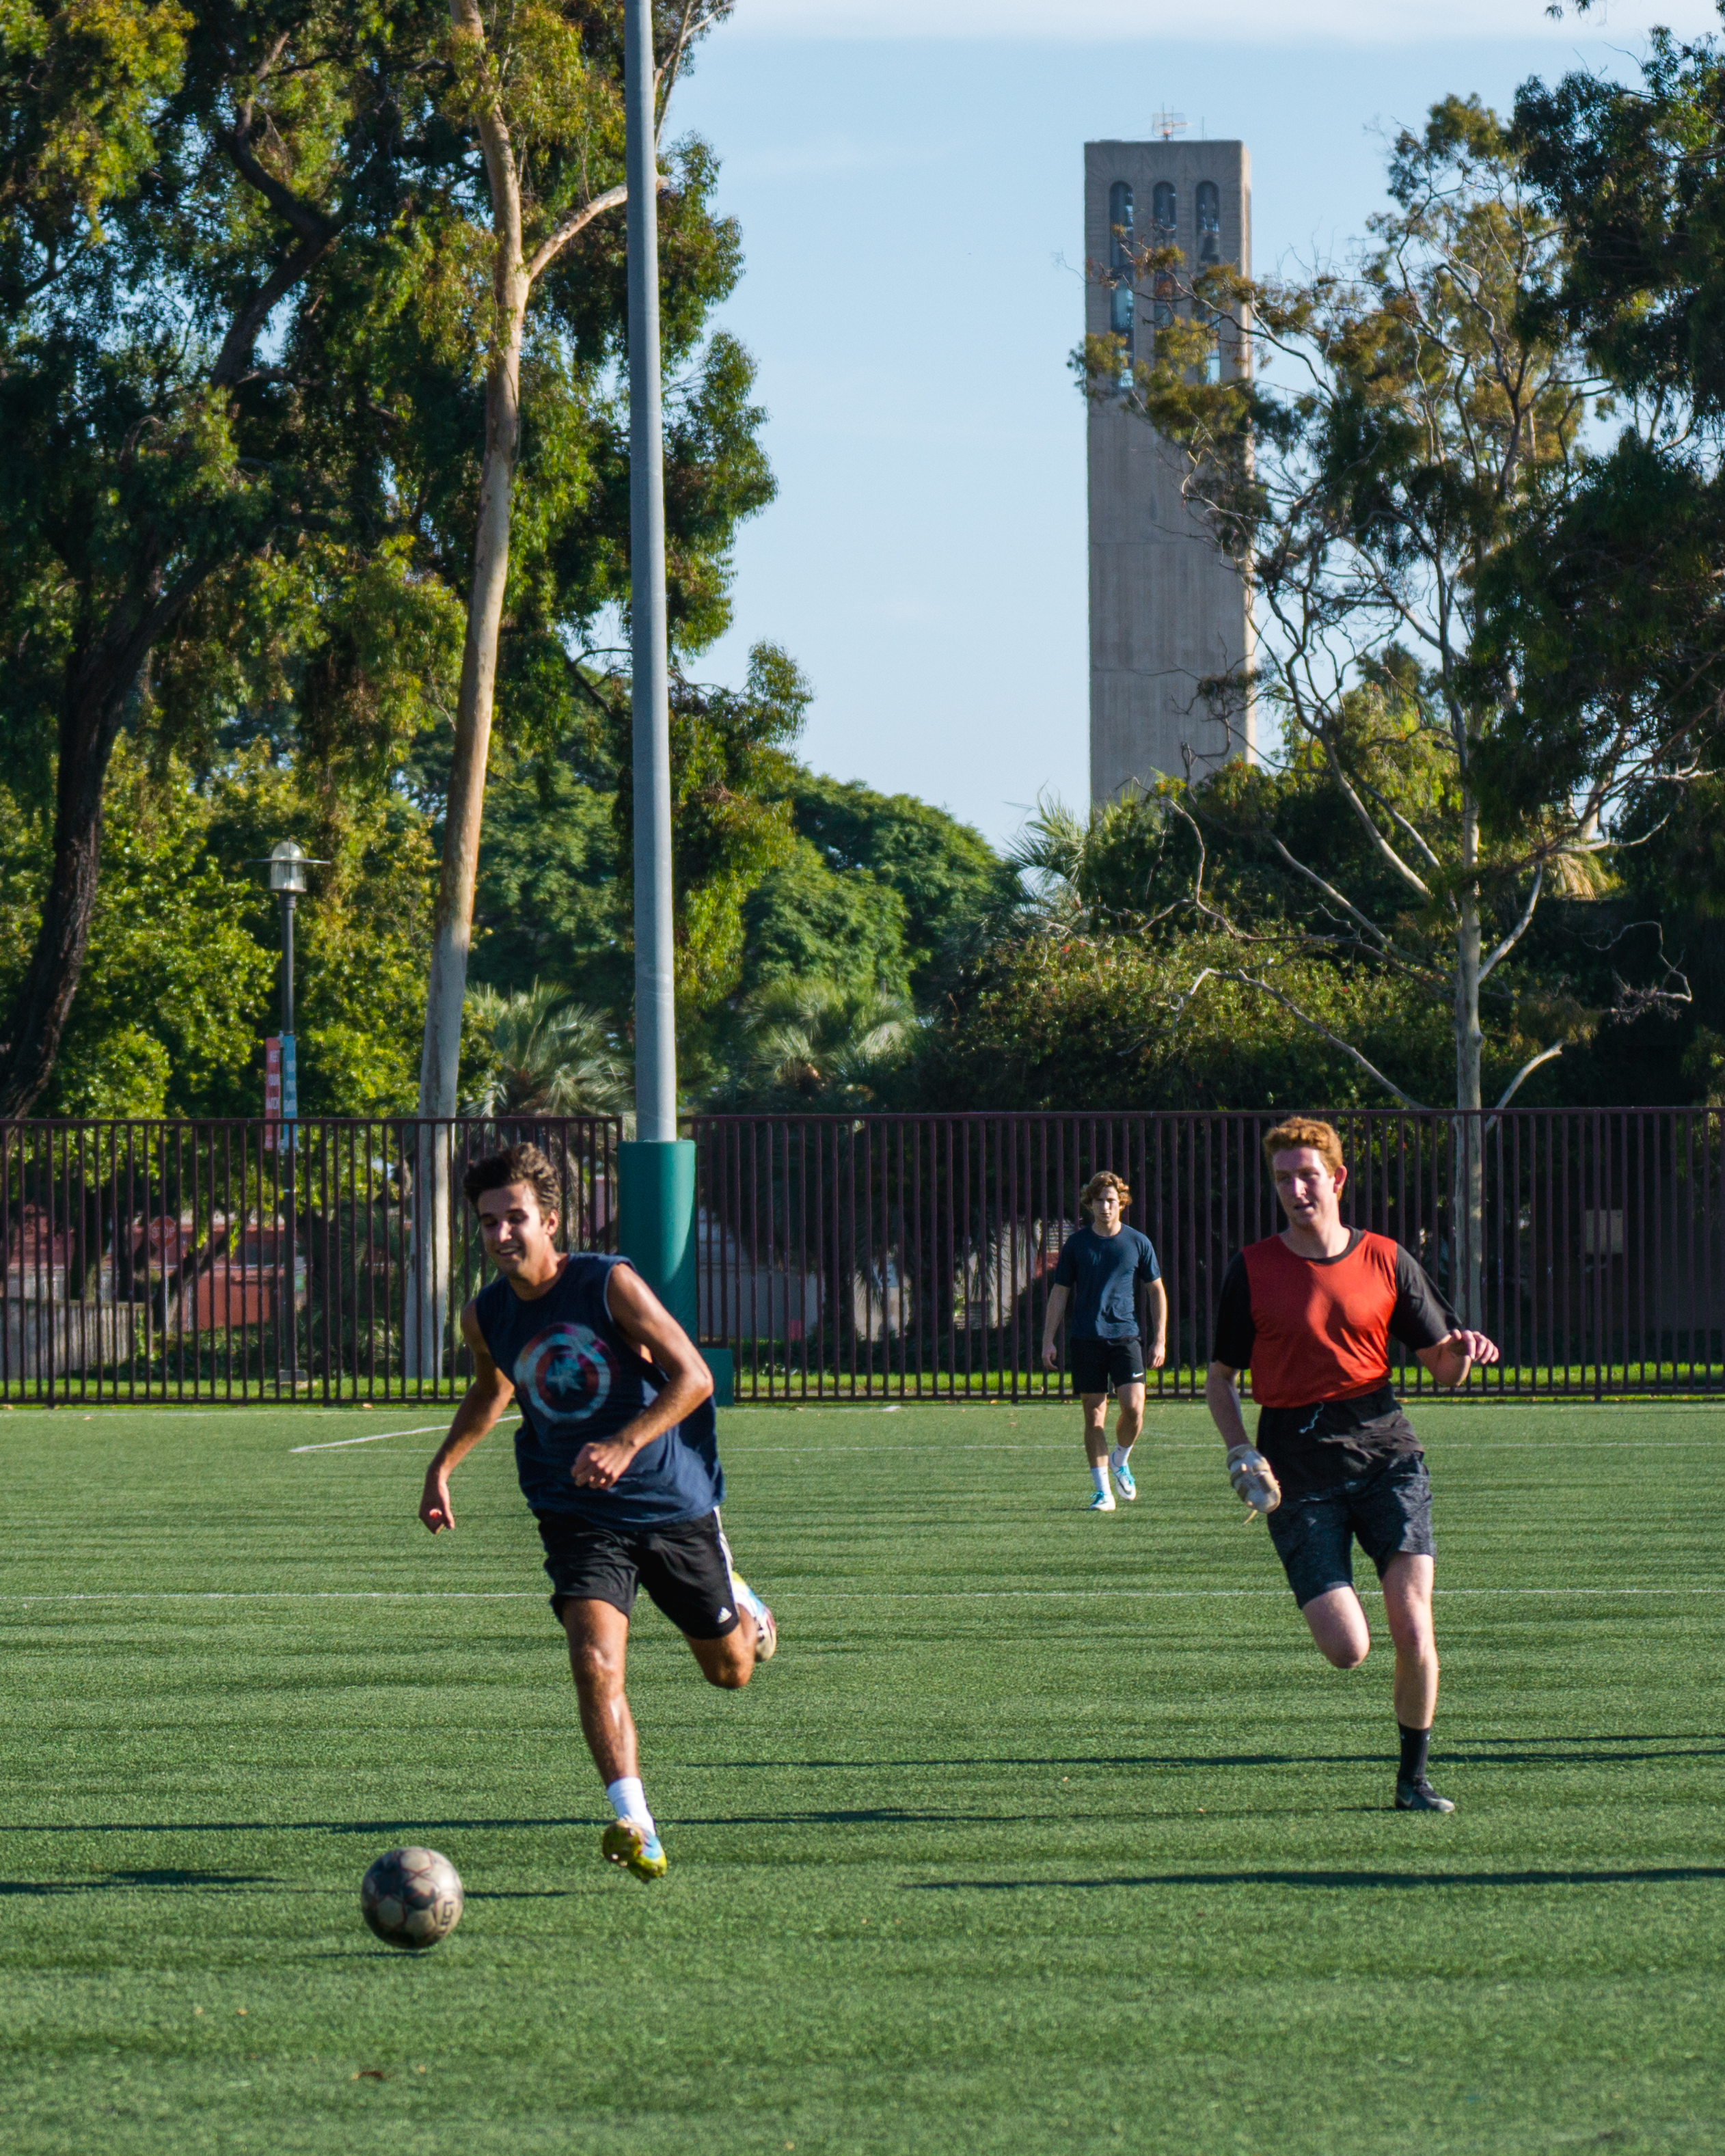 UCSB Students playing soccer at the Rec Cen fields with Storke Tower in the background.